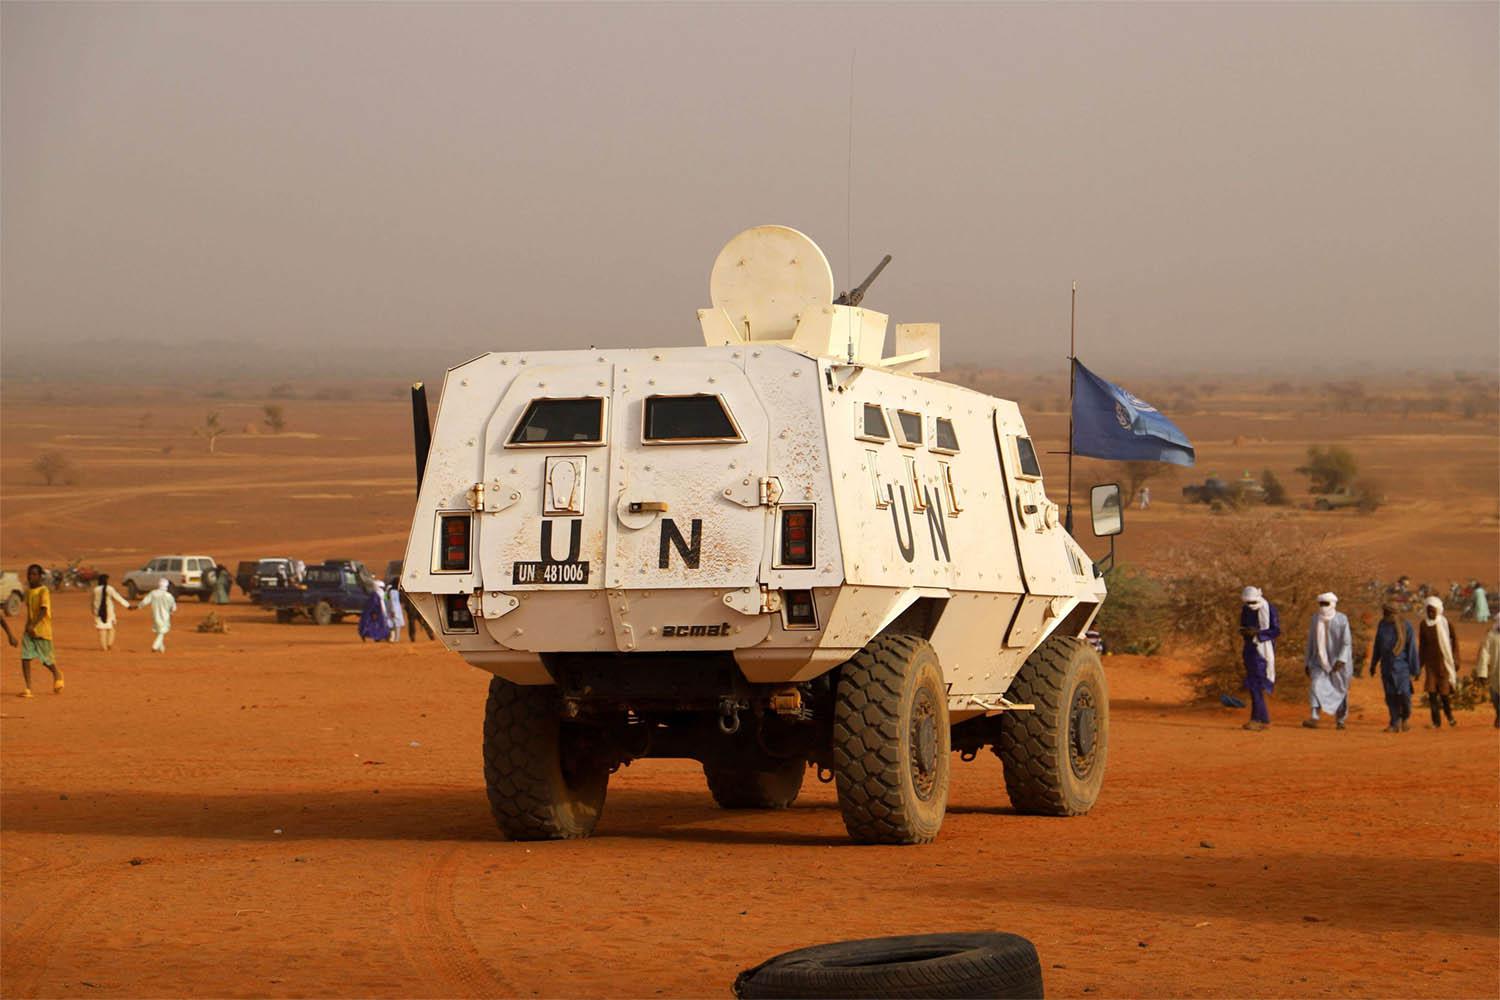 Mali's junta said Ivorian soldiers would be considered mercenaries and charged as such